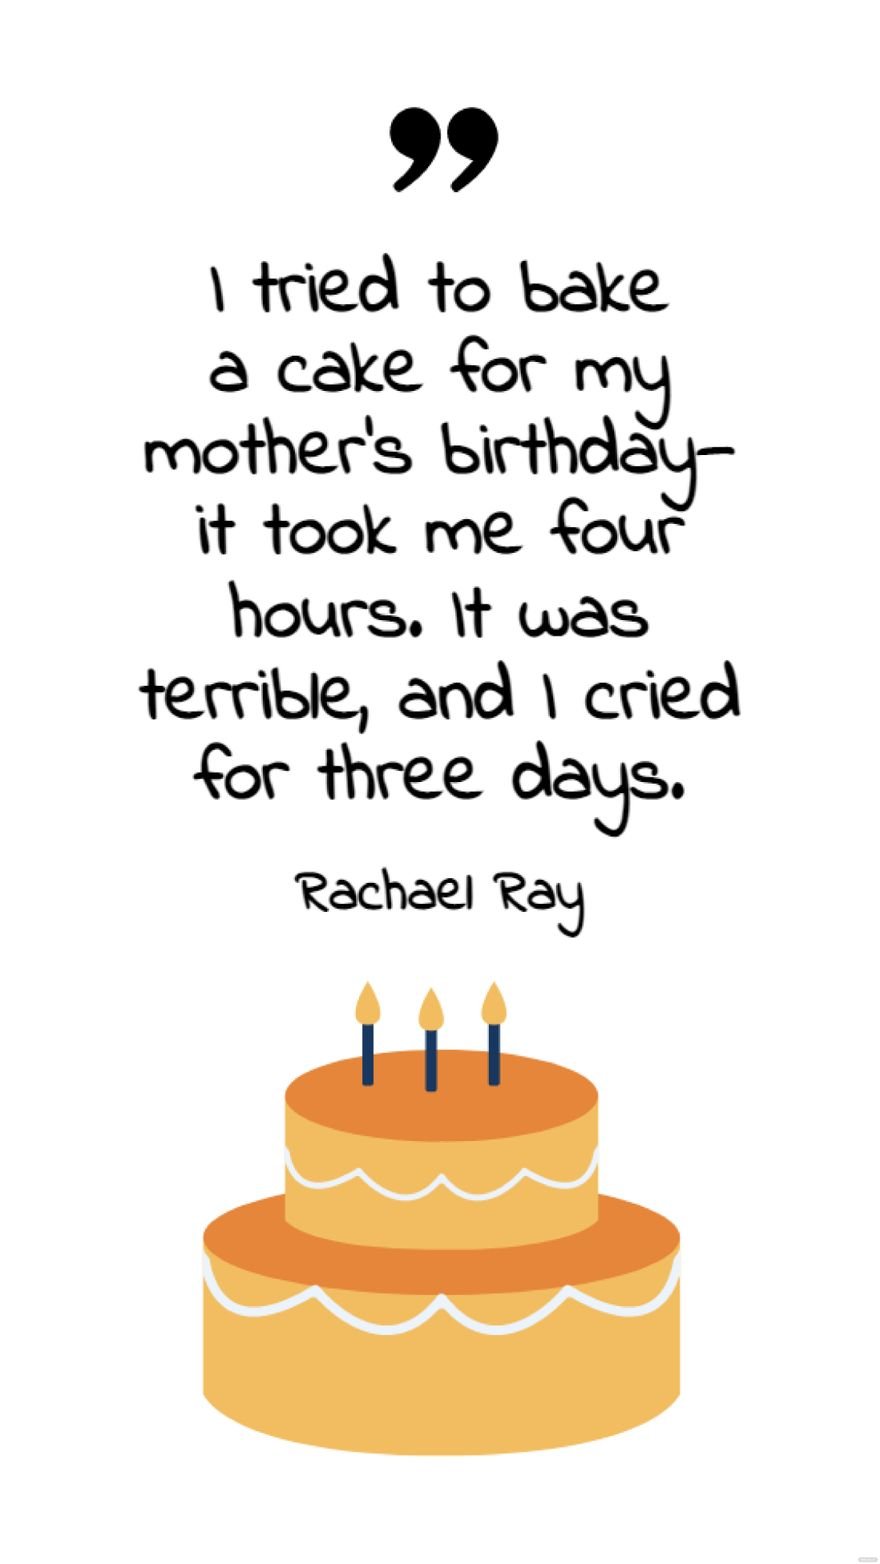 Free Rachael Ray - I tried to bake a cake for my mother's birthday - it took me four hours. It was terrible, and I cried for three days. in JPG